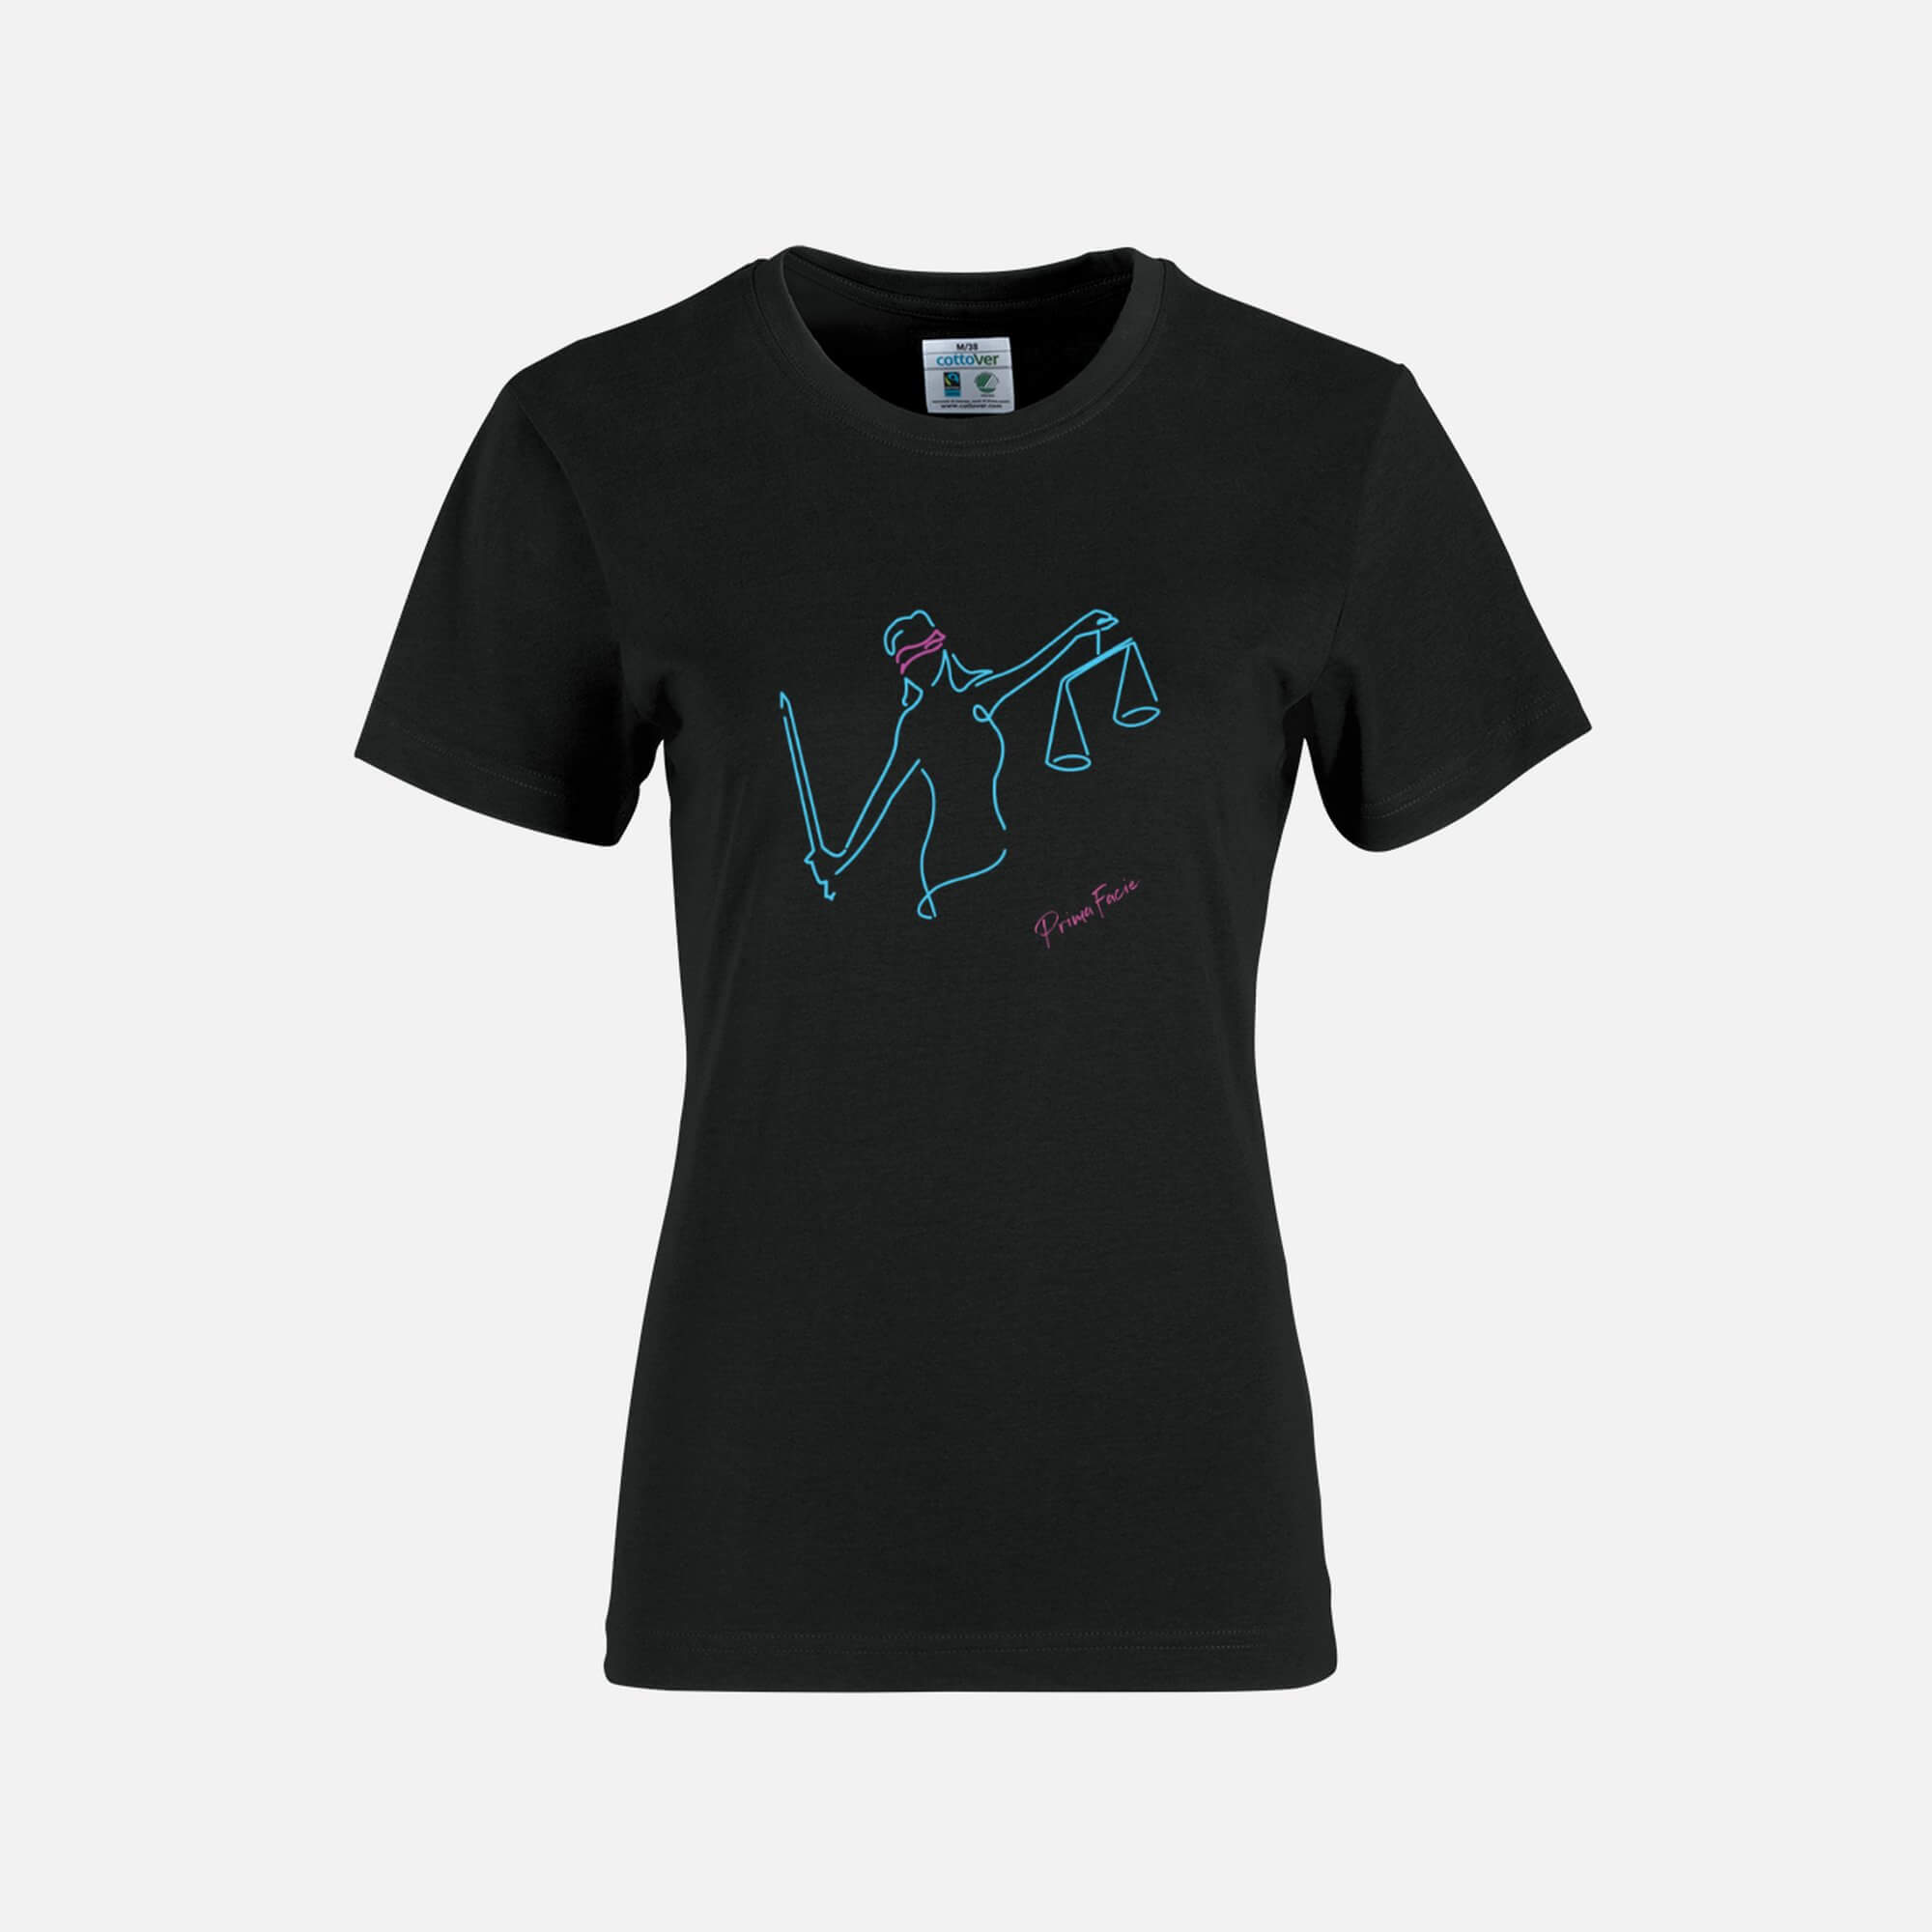 Neon Lady T Shirt - Prima Facie | Starring Jodie Comer